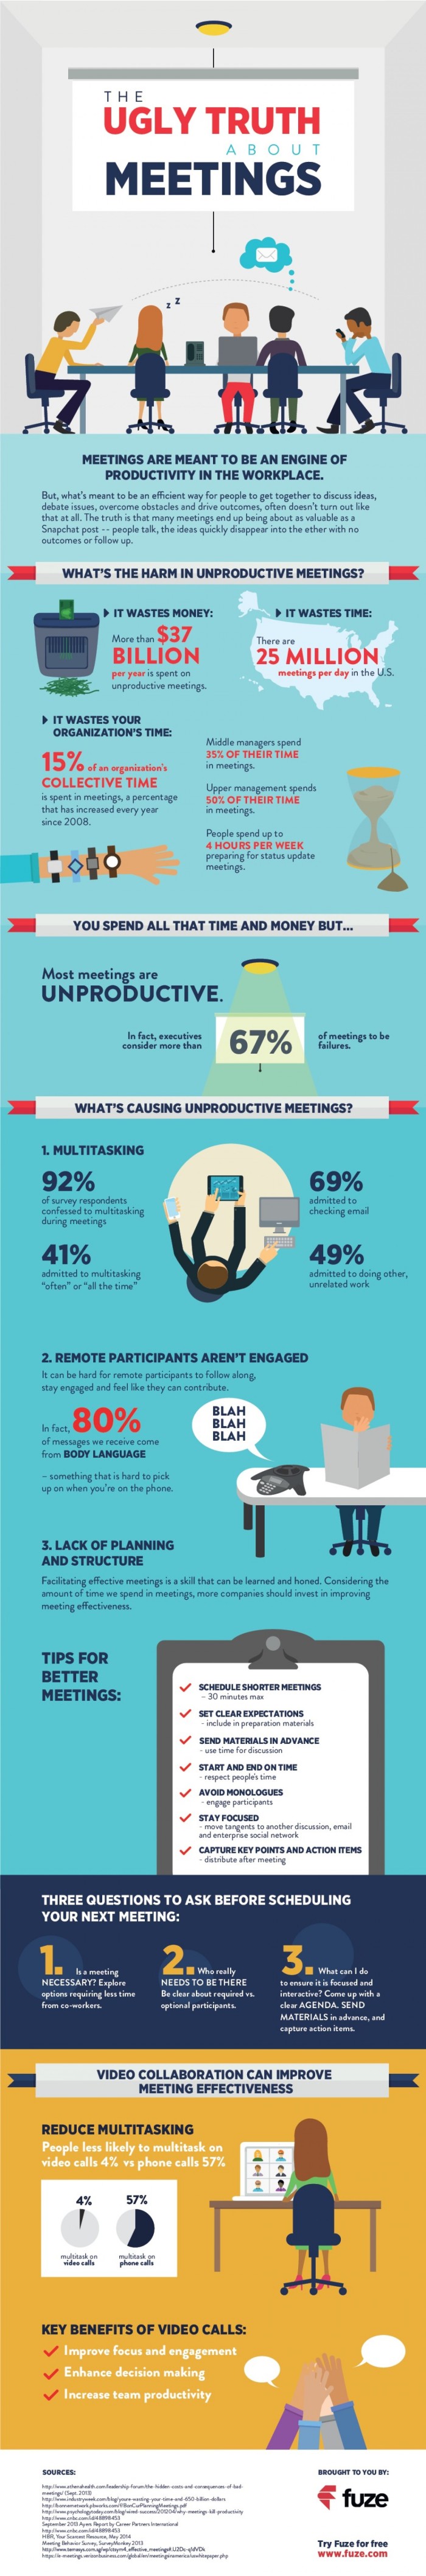 the ugly truth about meetings infographic